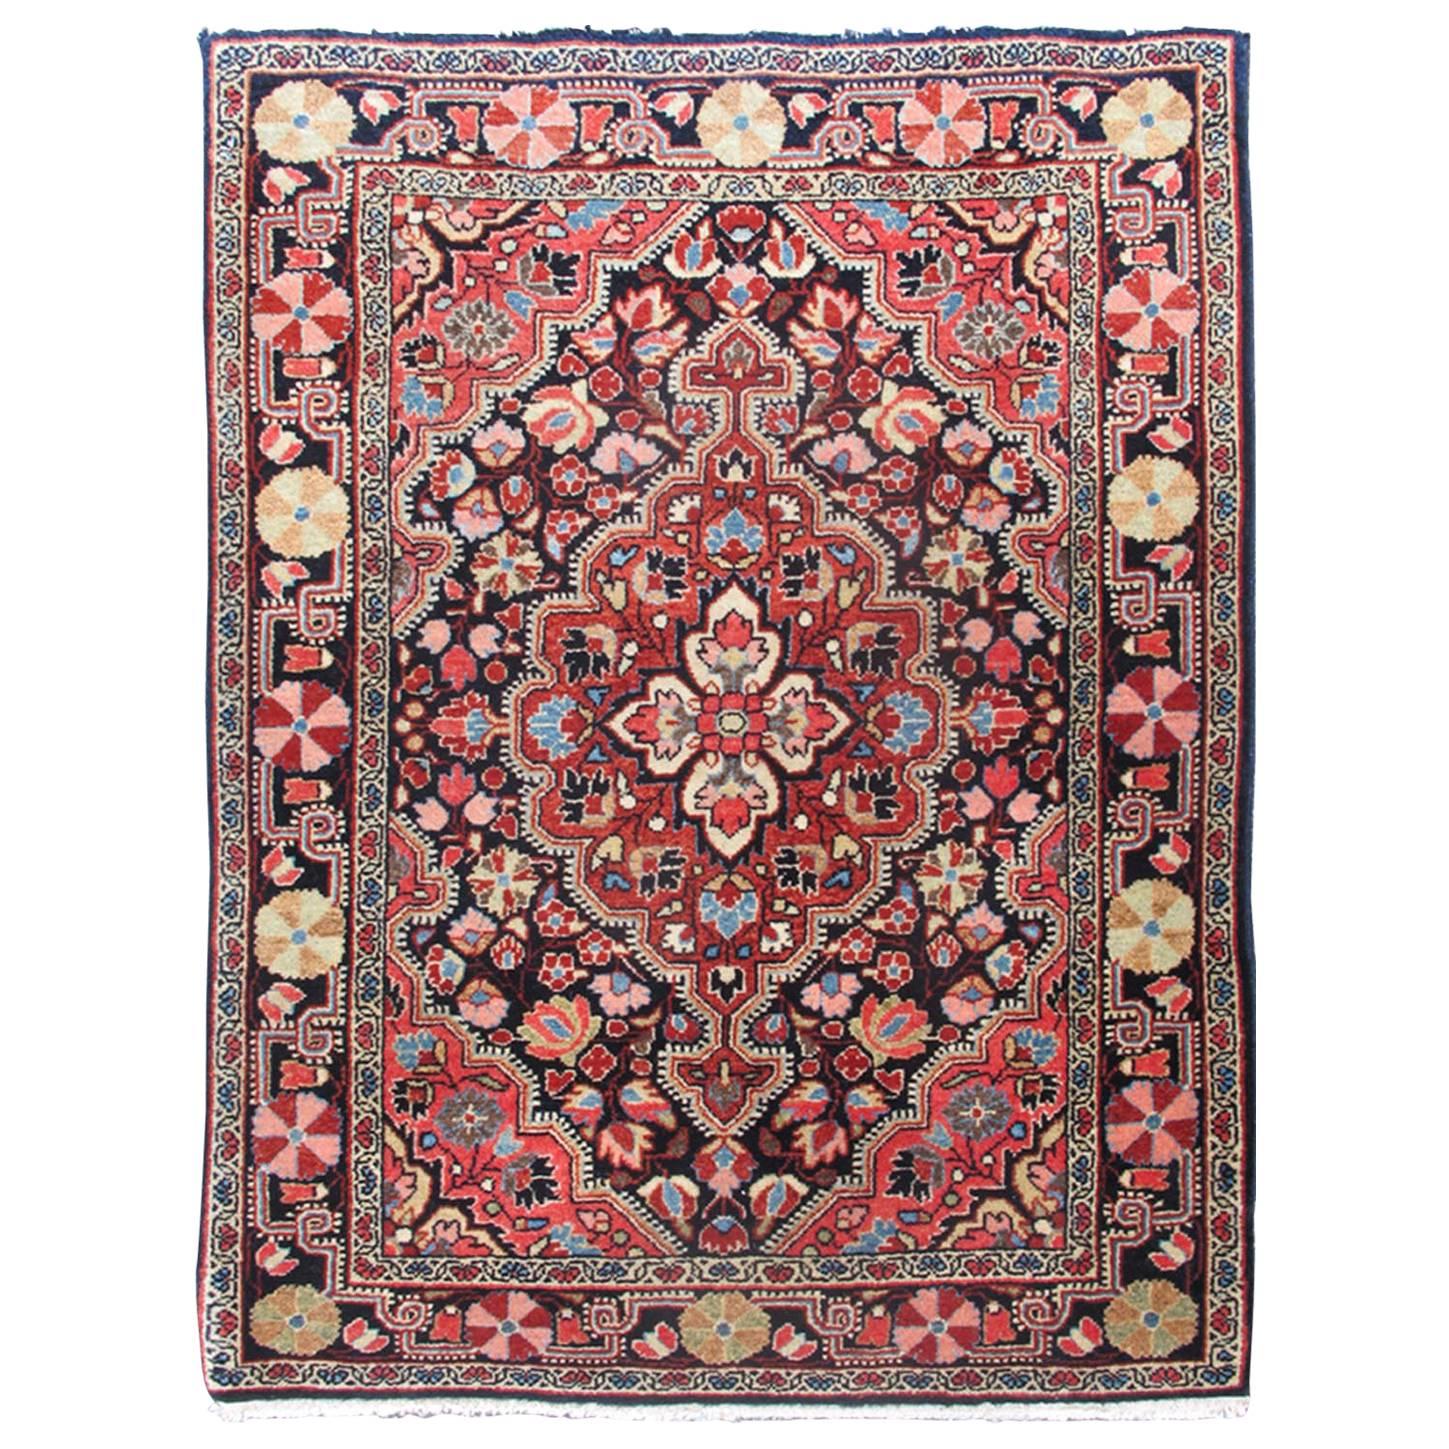 Antique Persian Sarouk Farahan Carpet with Intricate and Colorful Floral Motifs For Sale